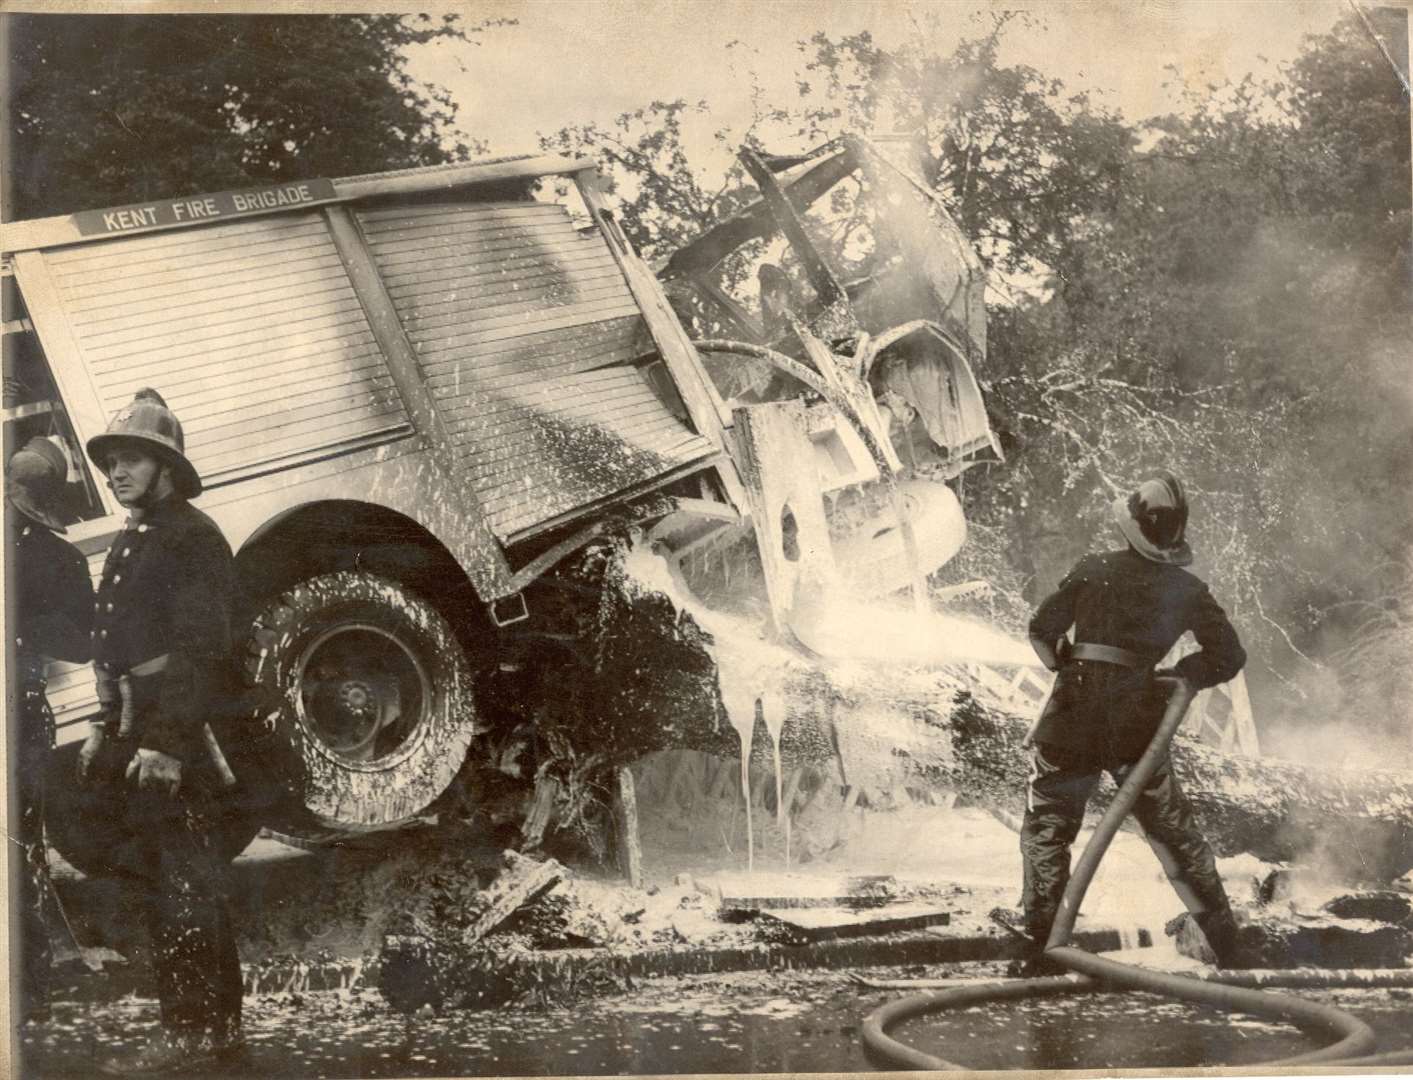 The fire tender crash in College Road, Maidstone, on September 2, 1970